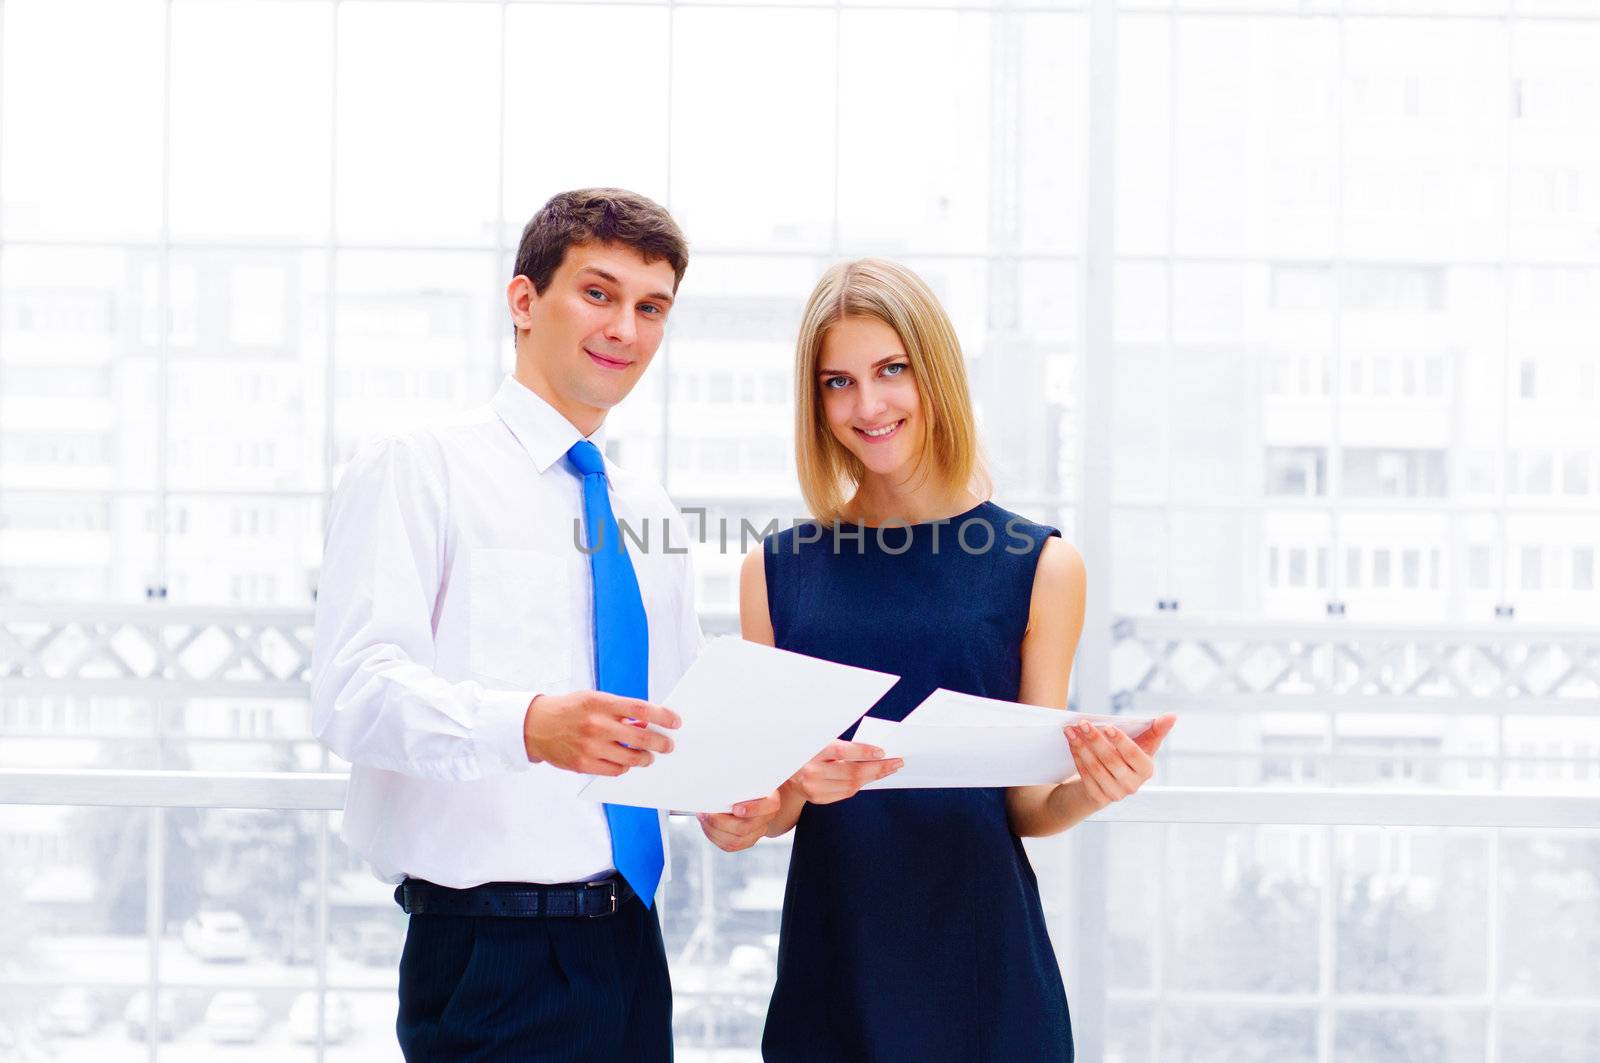 Portrait of young male and female entrepreneurs working together